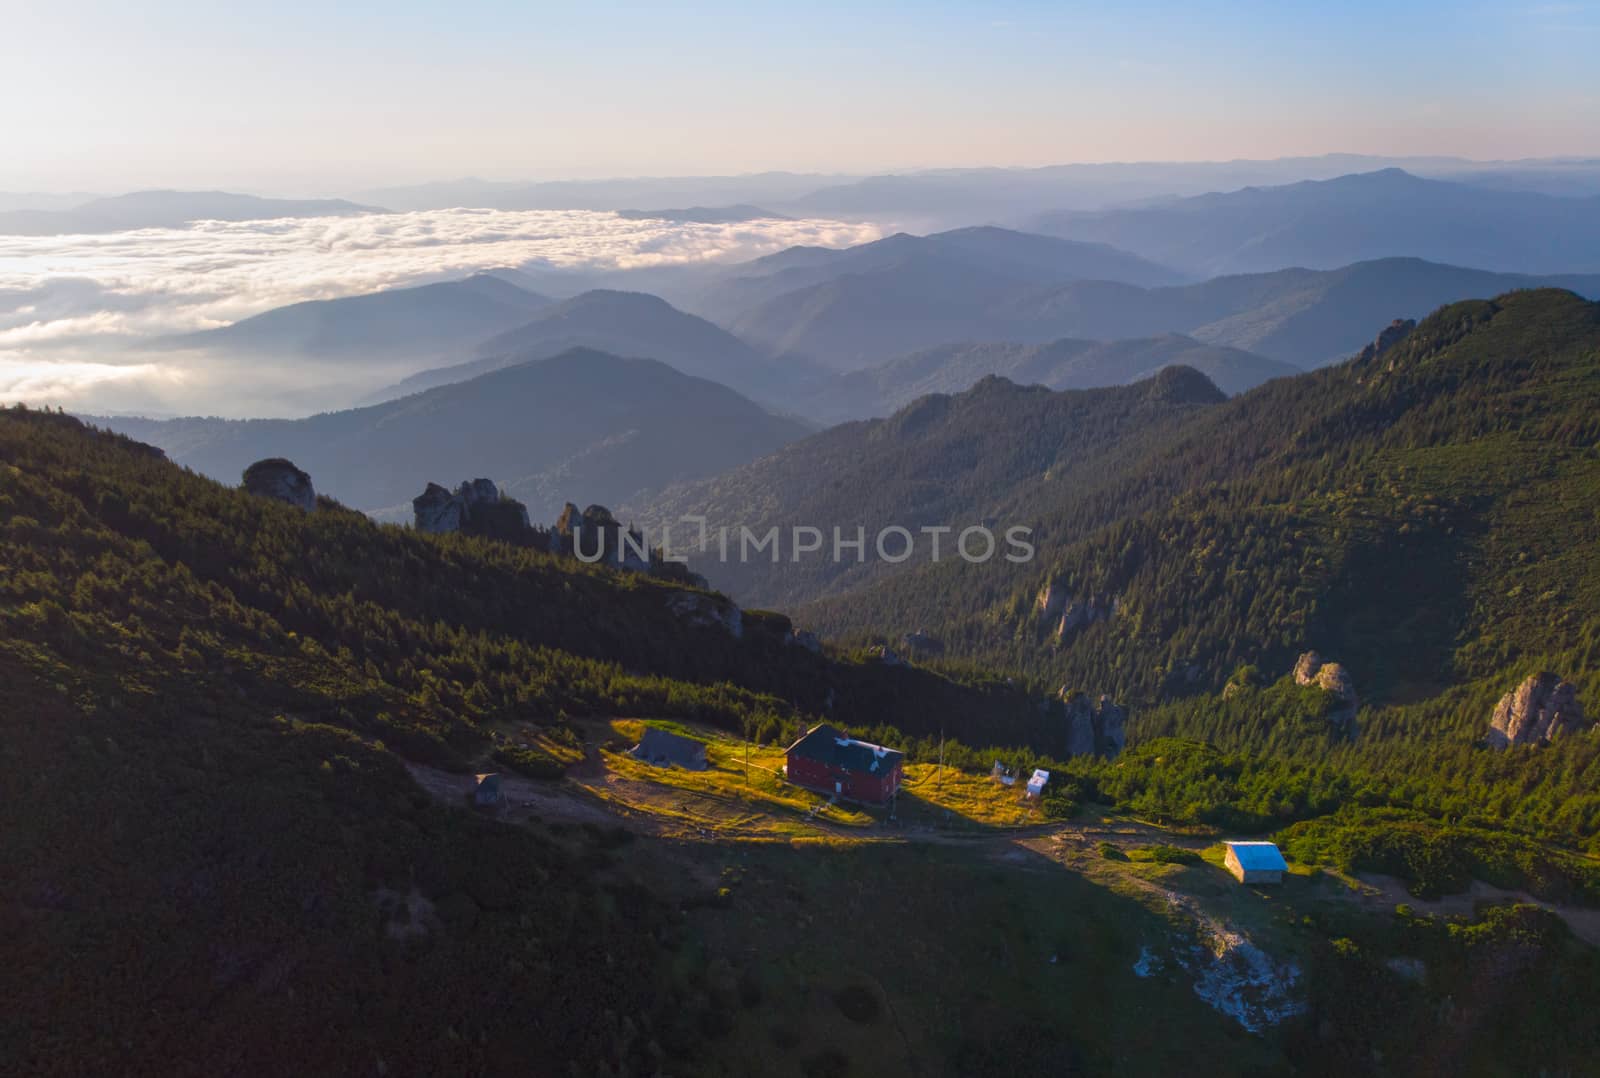 Mountain shelter and forest landscape at sunrise